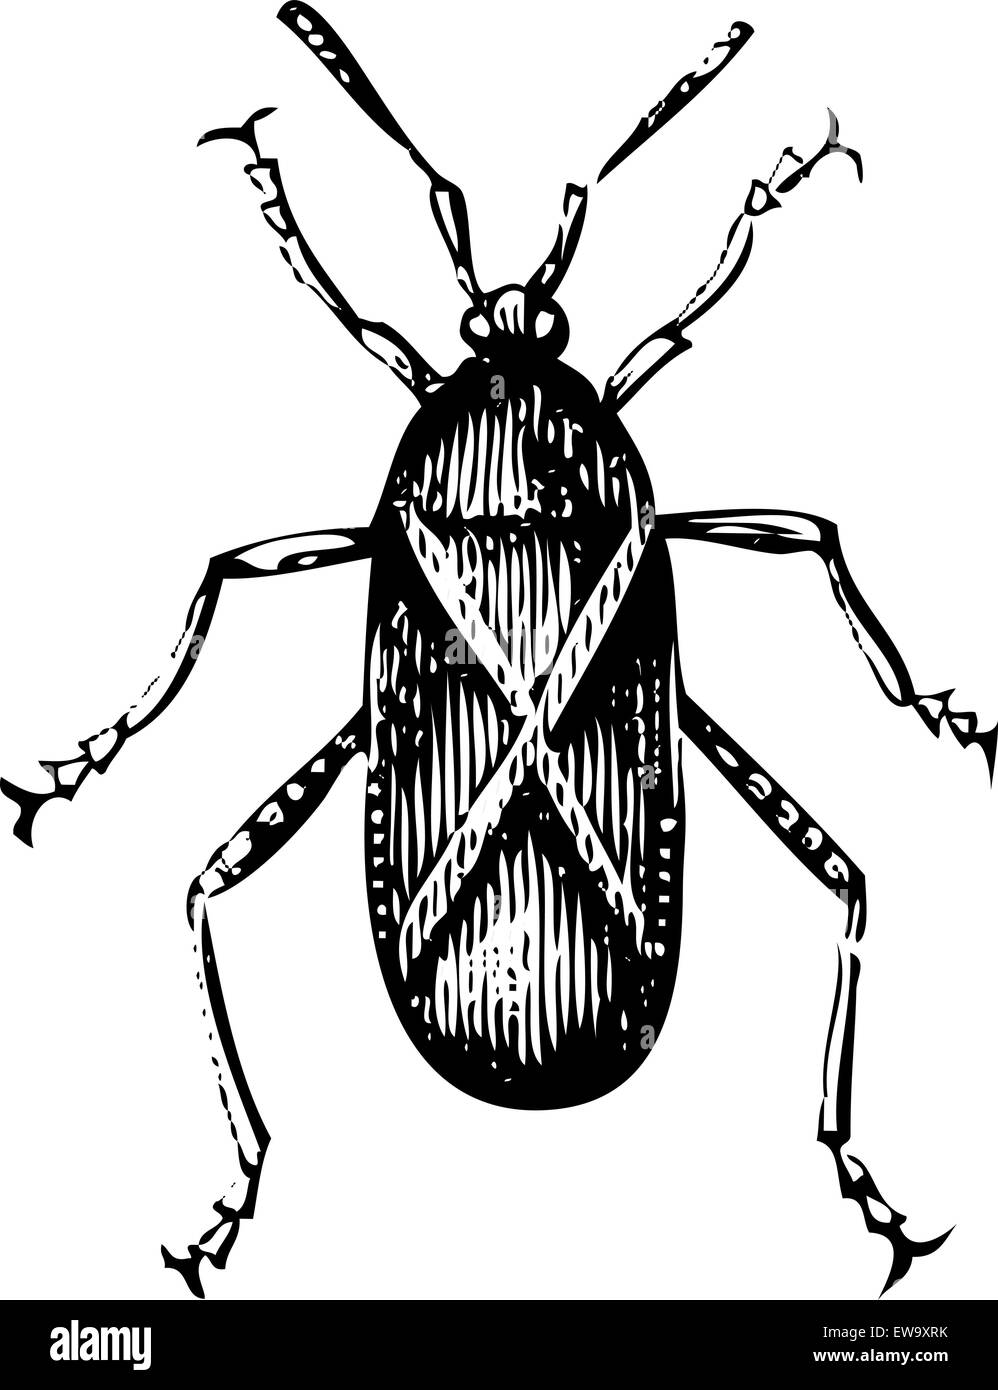 Old engraved illustration of a Squash bug or Coreus tristis, isolated on a white background. Live traced. Stock Vector